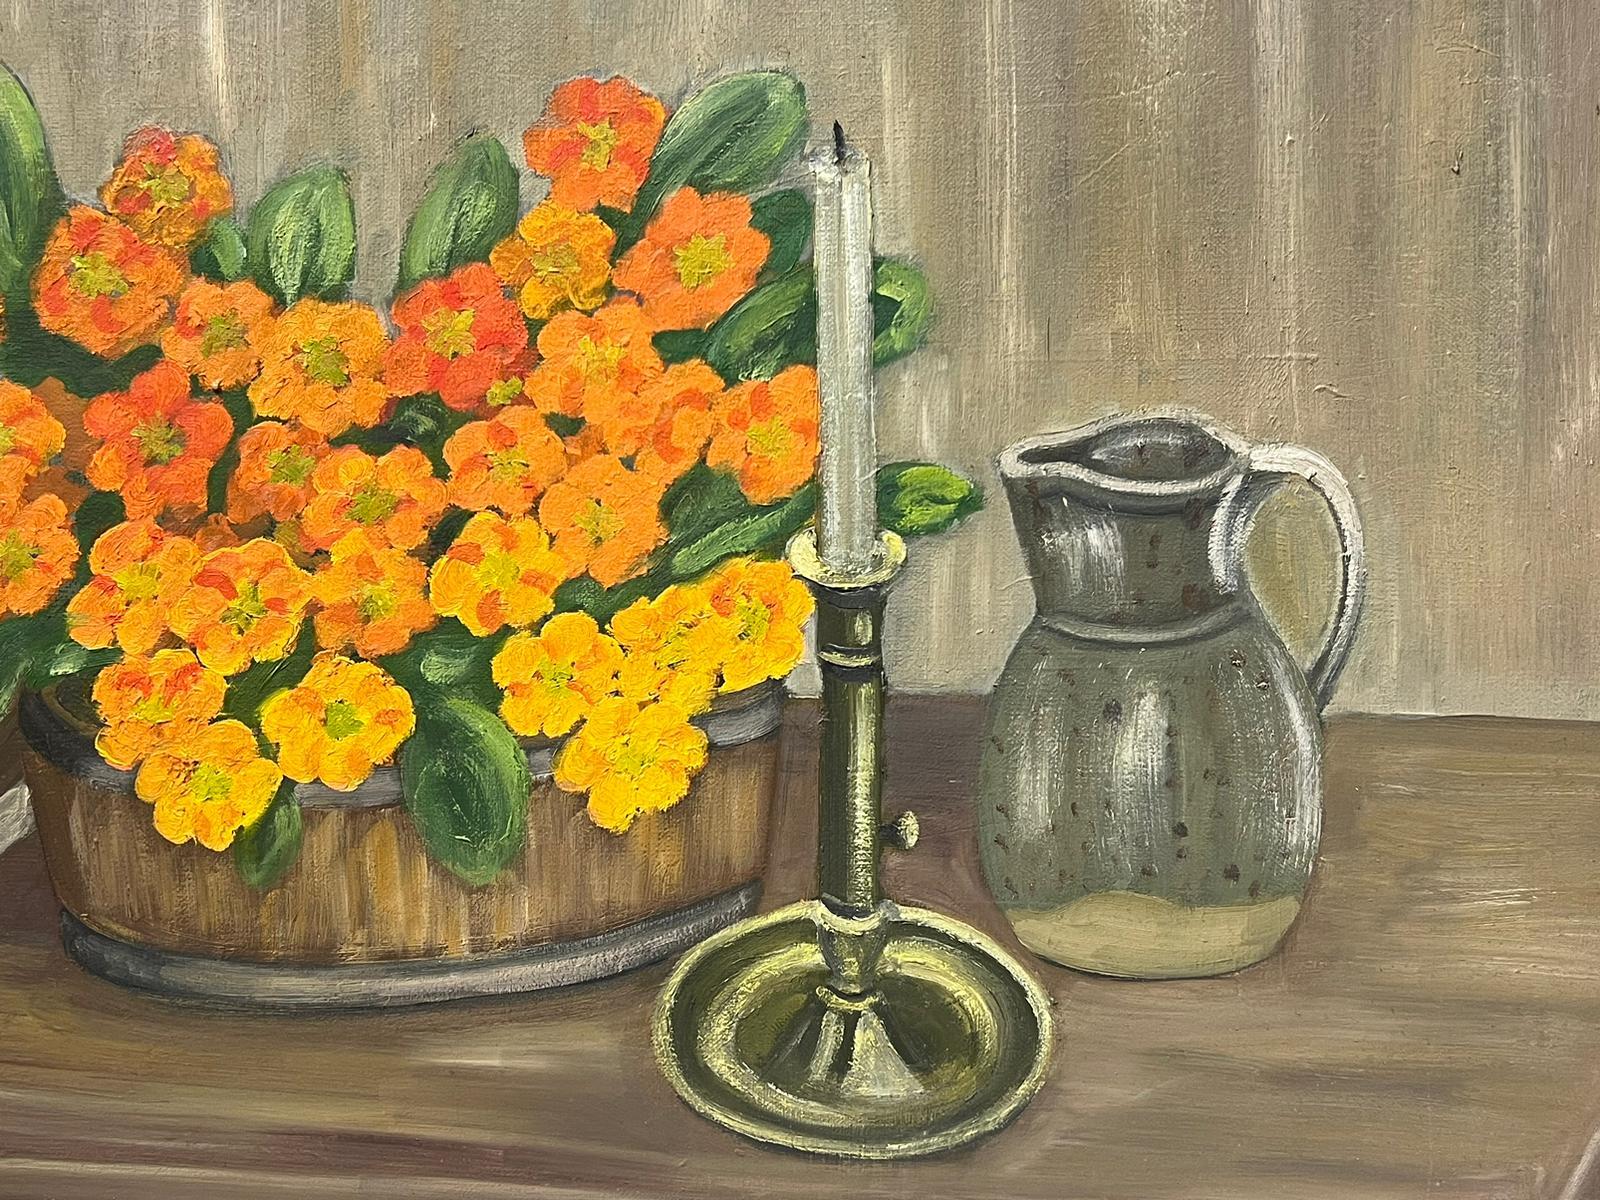 Mid 20th Century French Oil Painting Orange Pansies & Candle Table Interior  For Sale 3